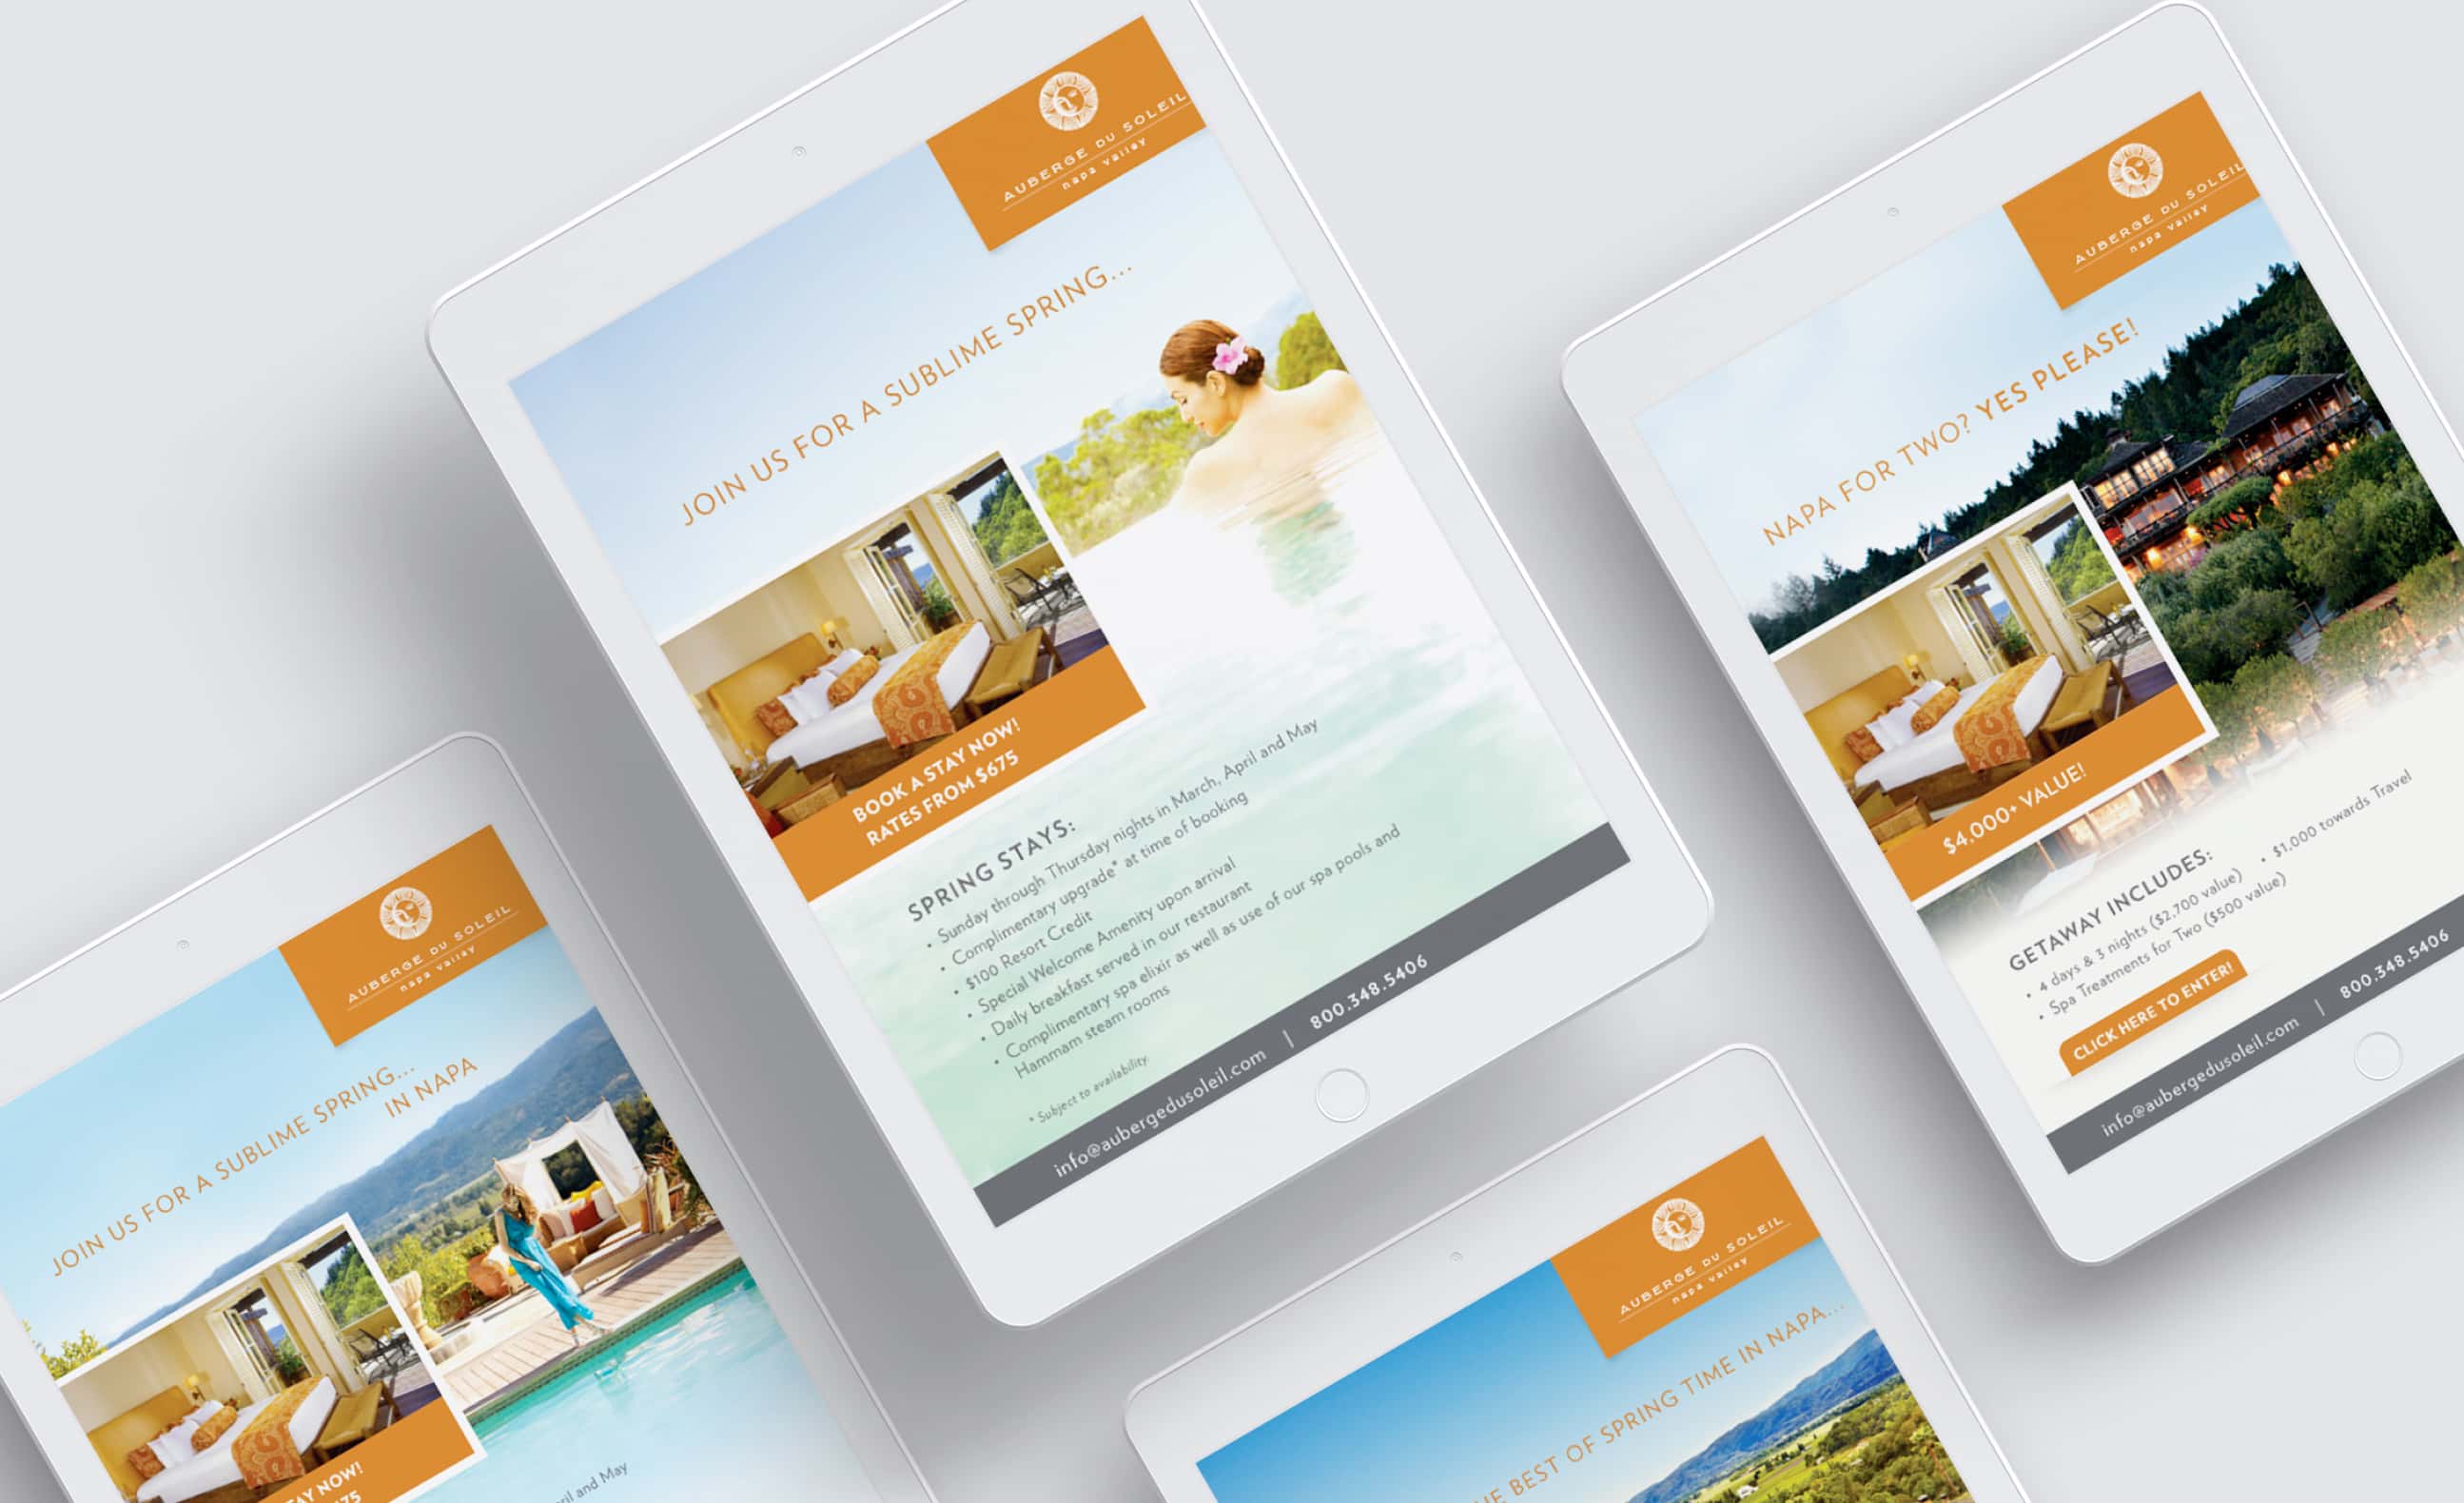 A tablet displaying multiple views of a promotional offer for a spring getaway at an Auberge resort, with text describing the package details and inviting viewers to 'Join us for a sublime spring'.